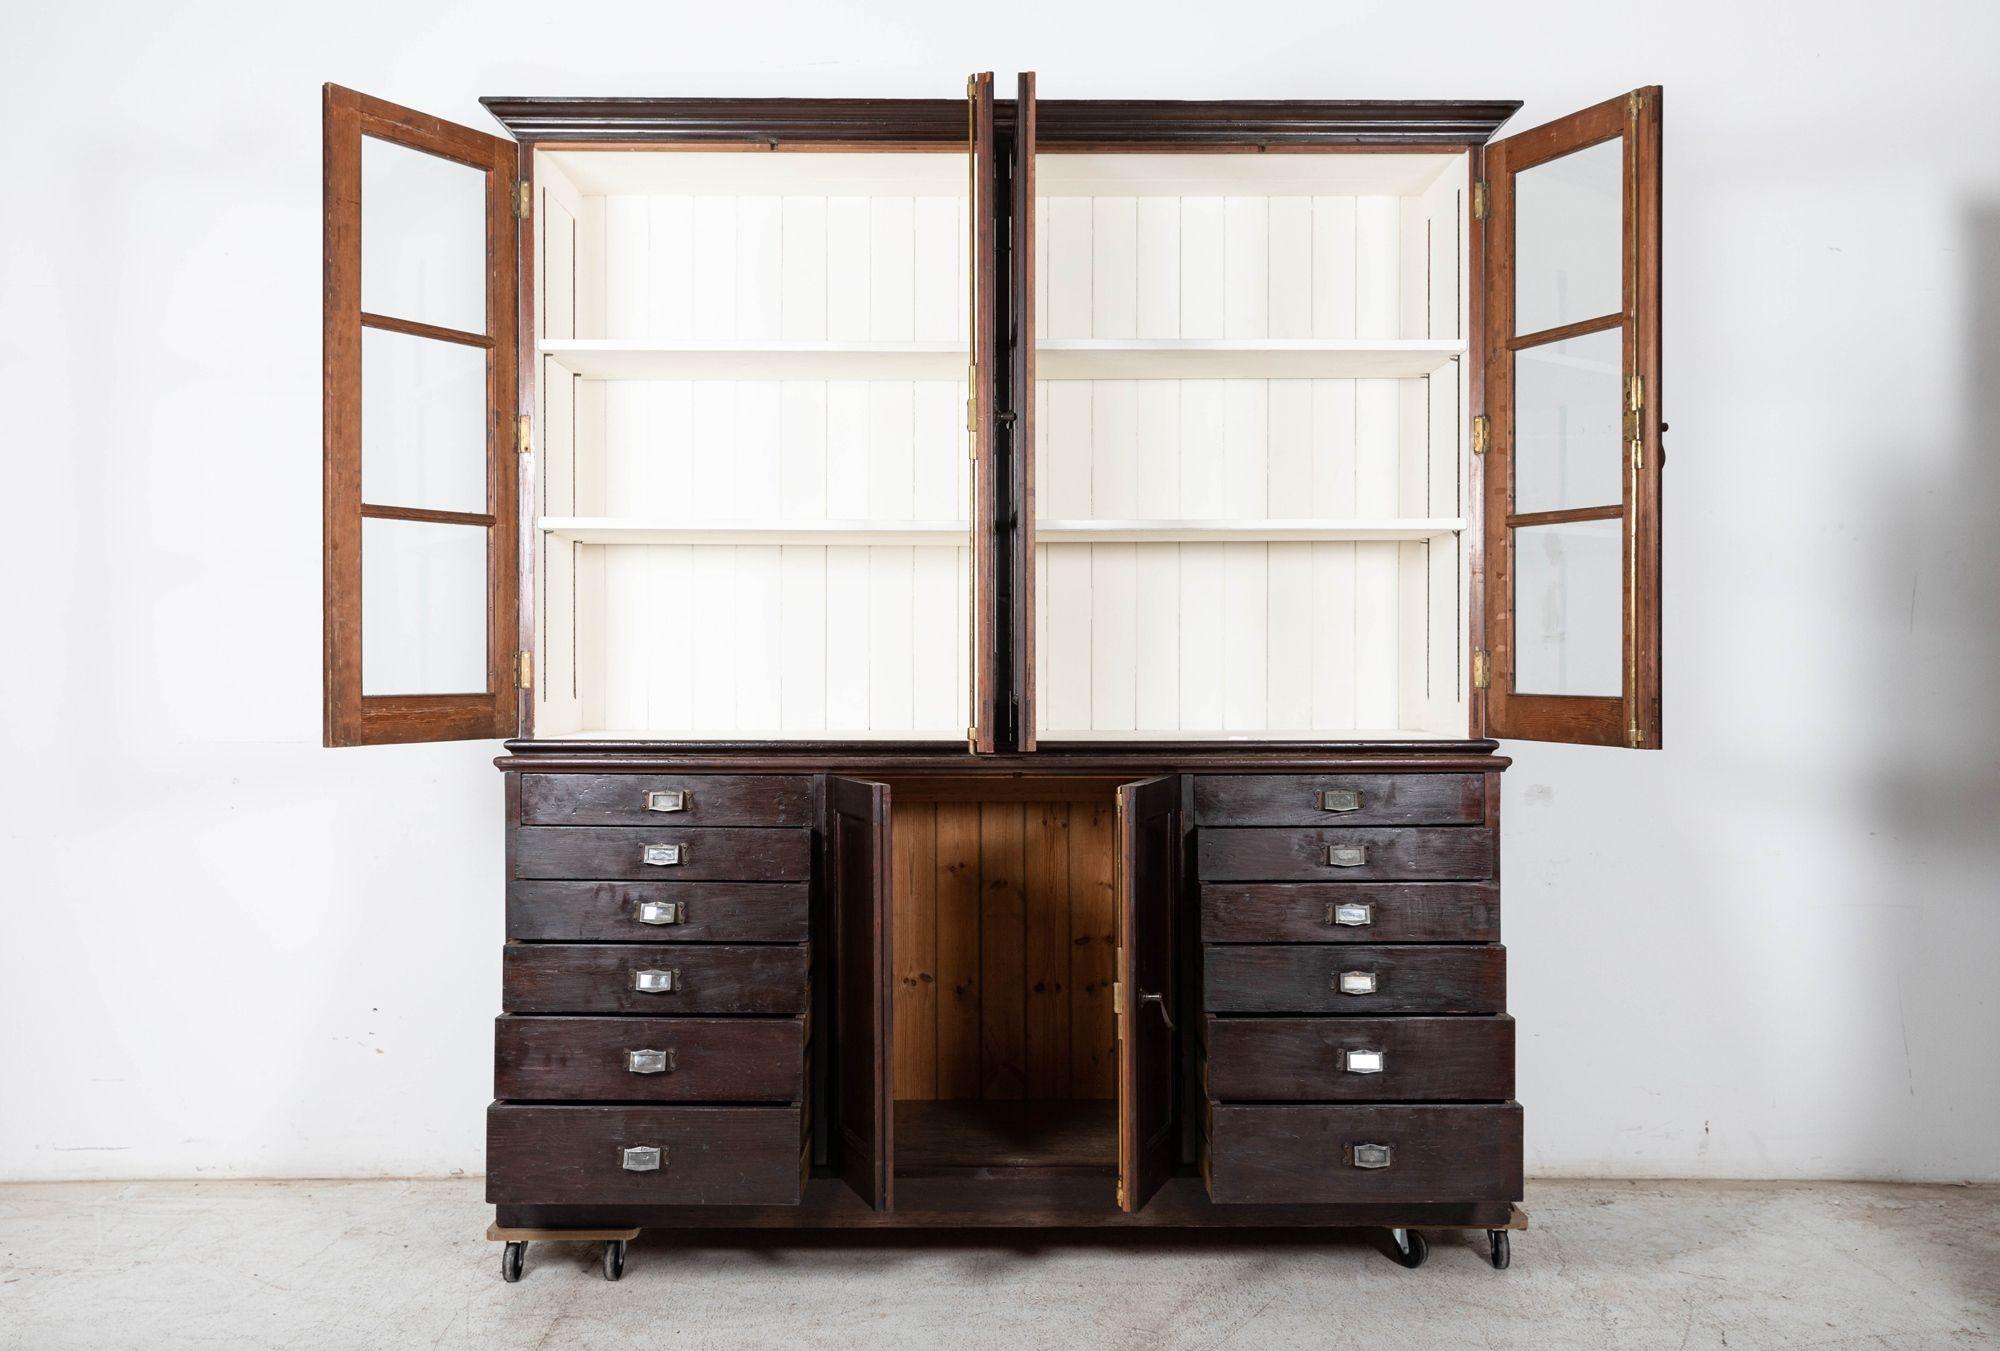 Circa 1890
Large 19thC English Pine Specimen Display Cabinet / Bookcase with adjustable shelving and graduating drawers in original finish
Exceptional quality with all original brass hardware/drawer runners and locks
sku 1037
(2 sections)
W211 x D63